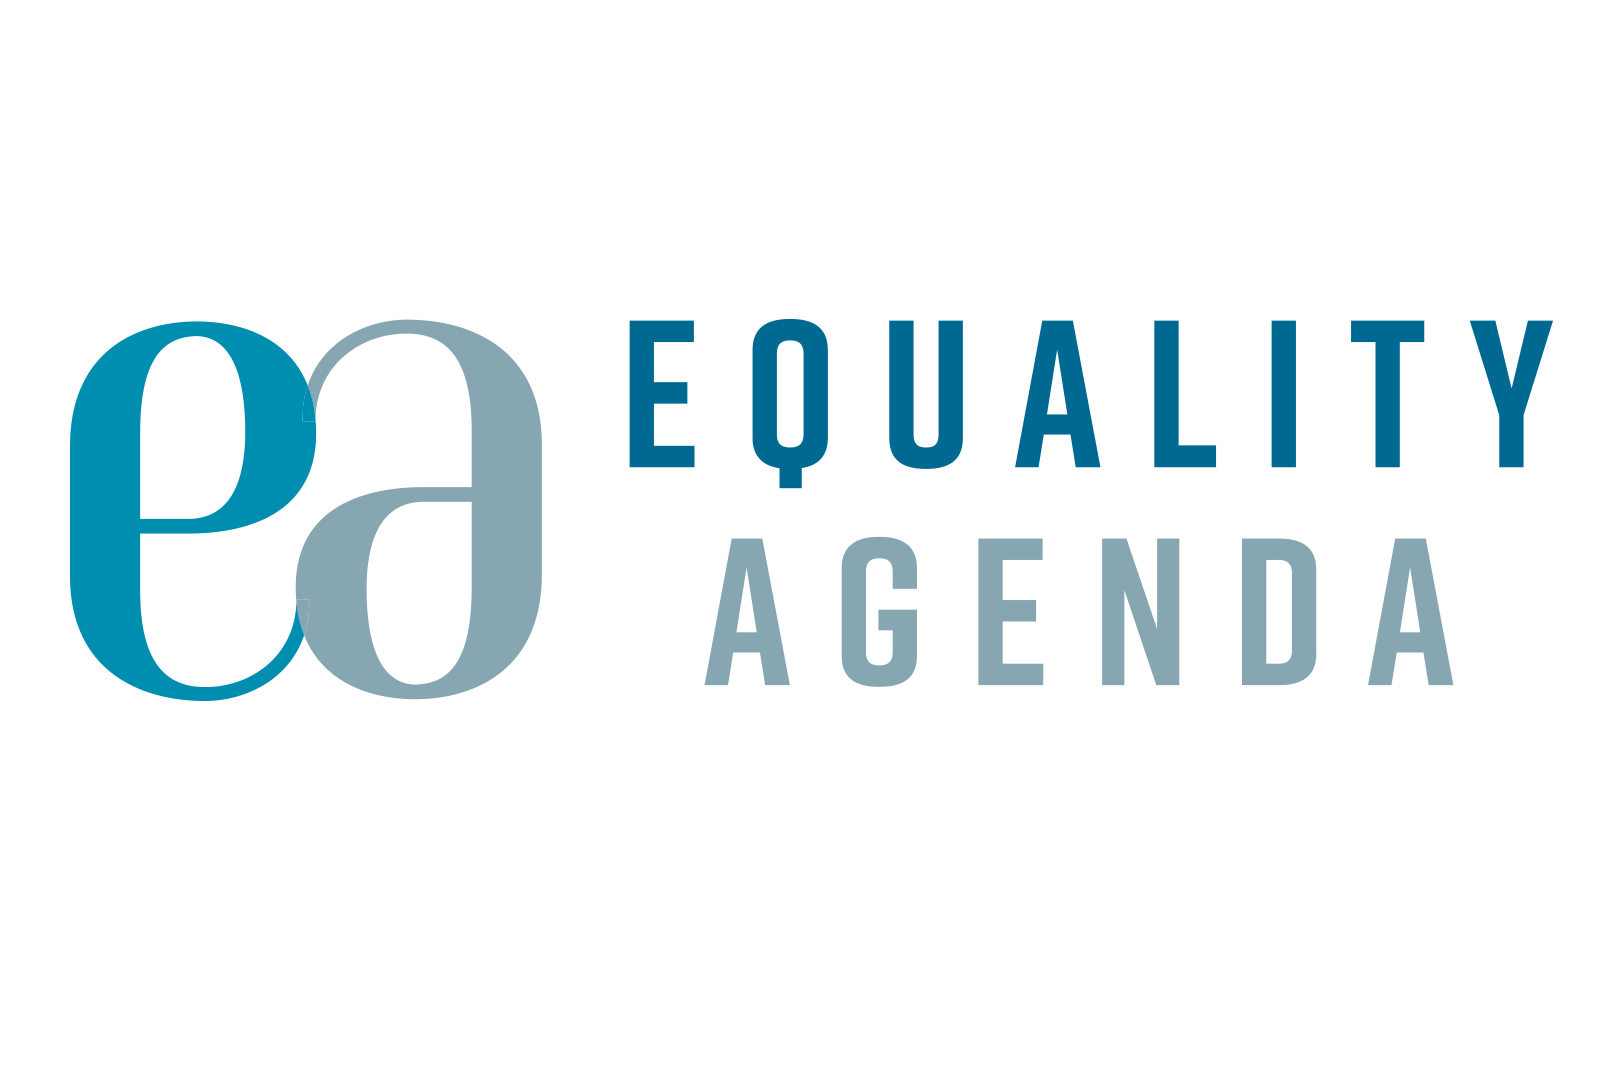 Equality Agenda supports and develops gender equality in workplaces and organisations